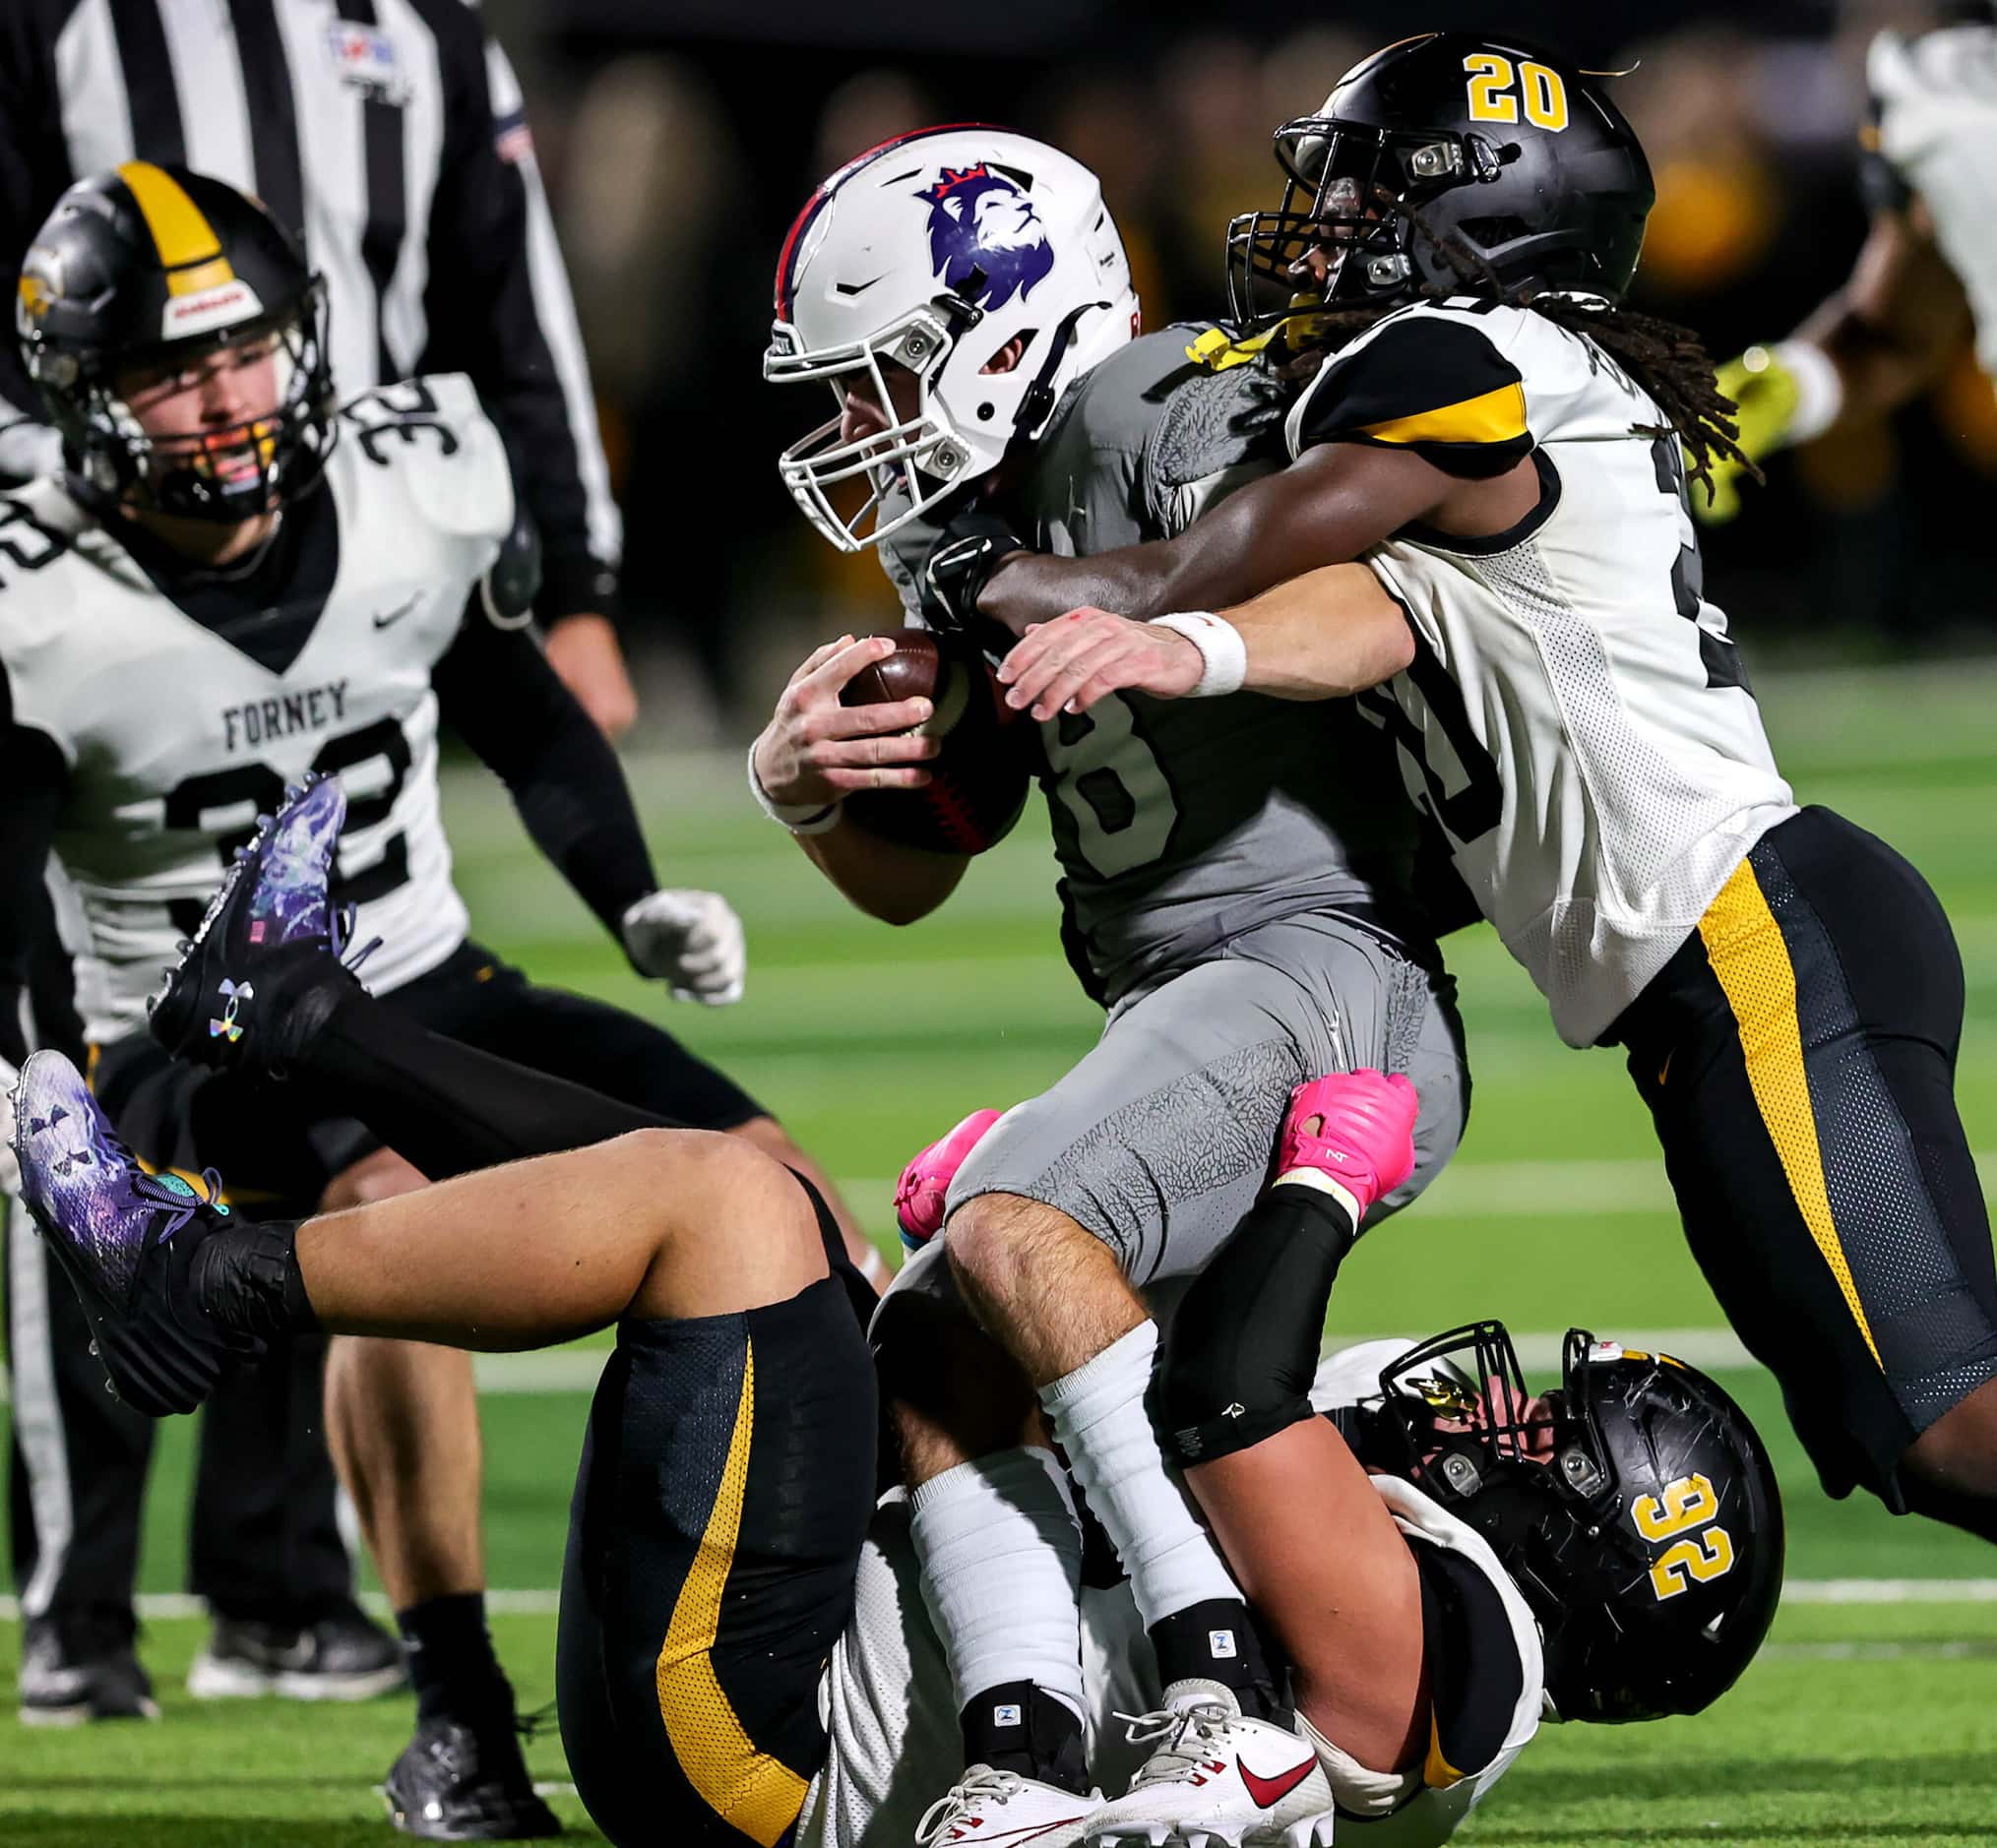 Richland quarterback Drew Kates (8) gets stopped for a short gain by Forney defensive...